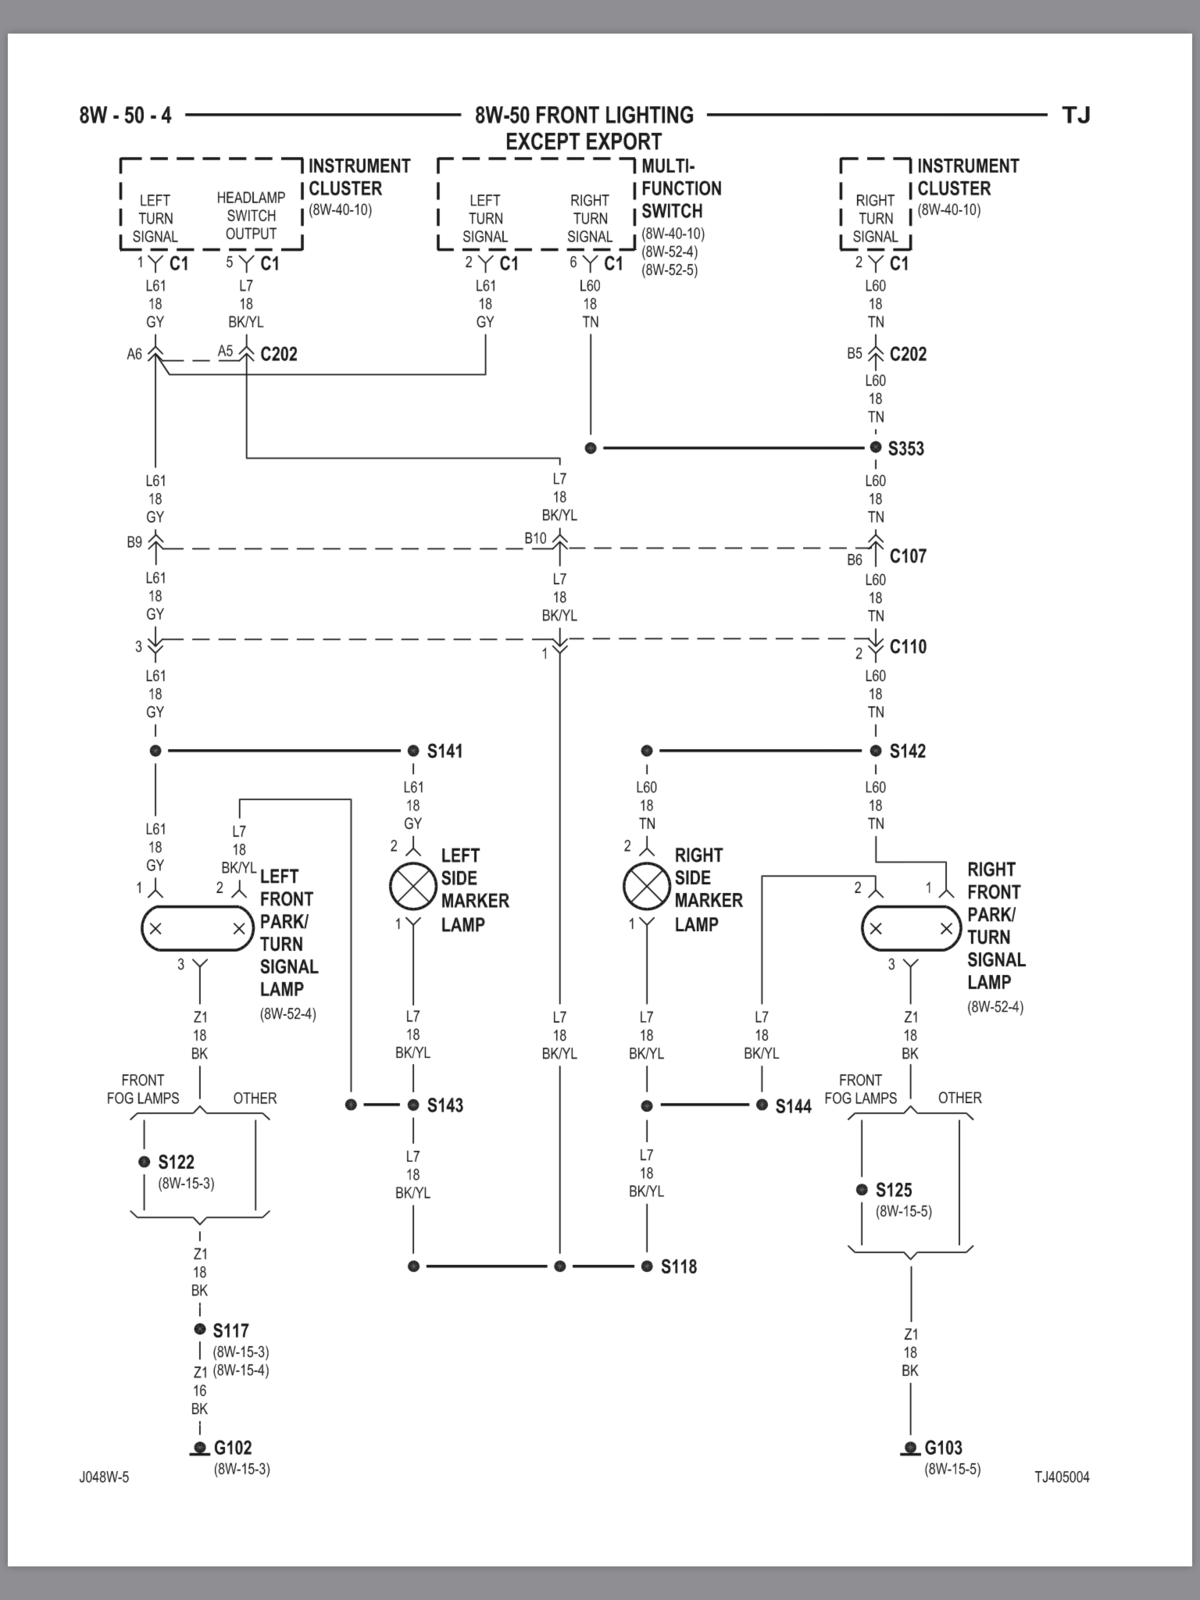 Wiring Guide or Diagram | Jeep Wrangler TJ Forum 94 Jeep Wrangler Wiring Diagram Jeep Wrangler TJ Forum